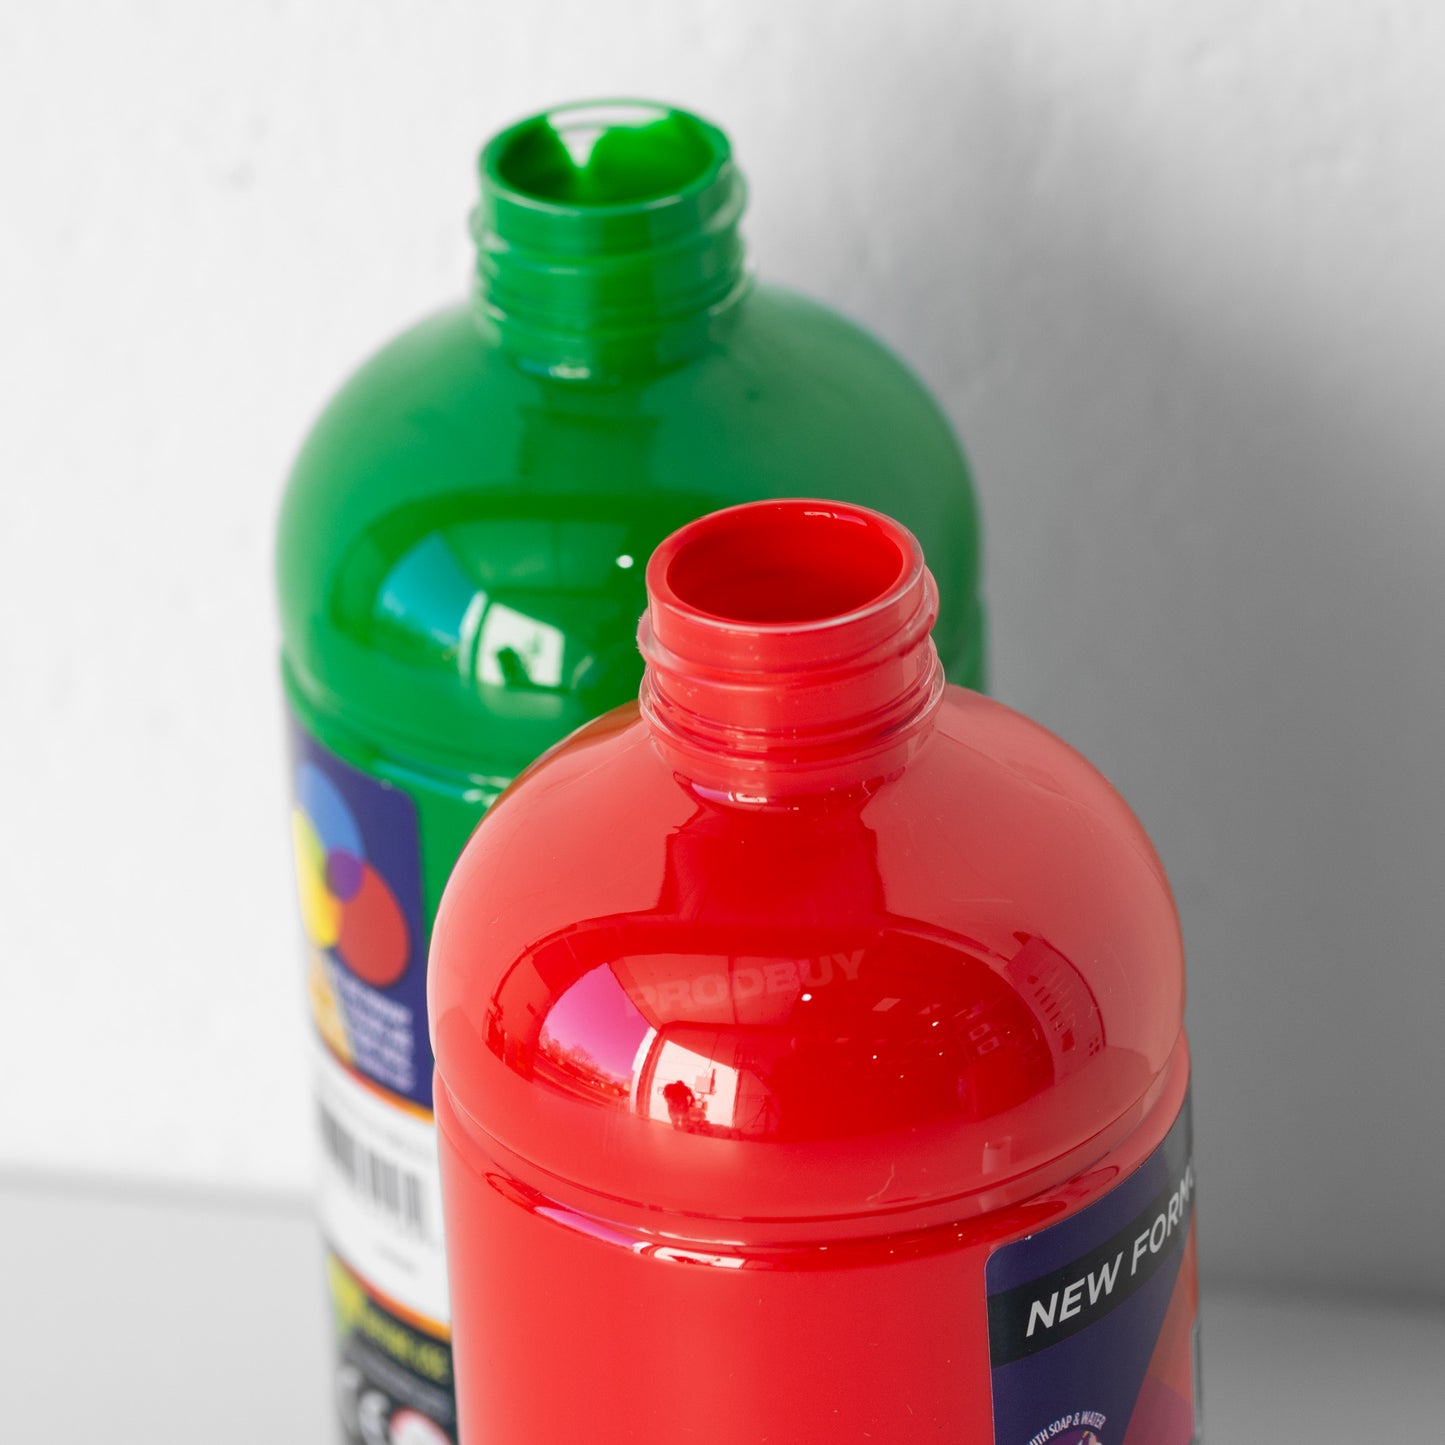 Set of 2 Green & Red 500ml Acrylic Paint Bottles